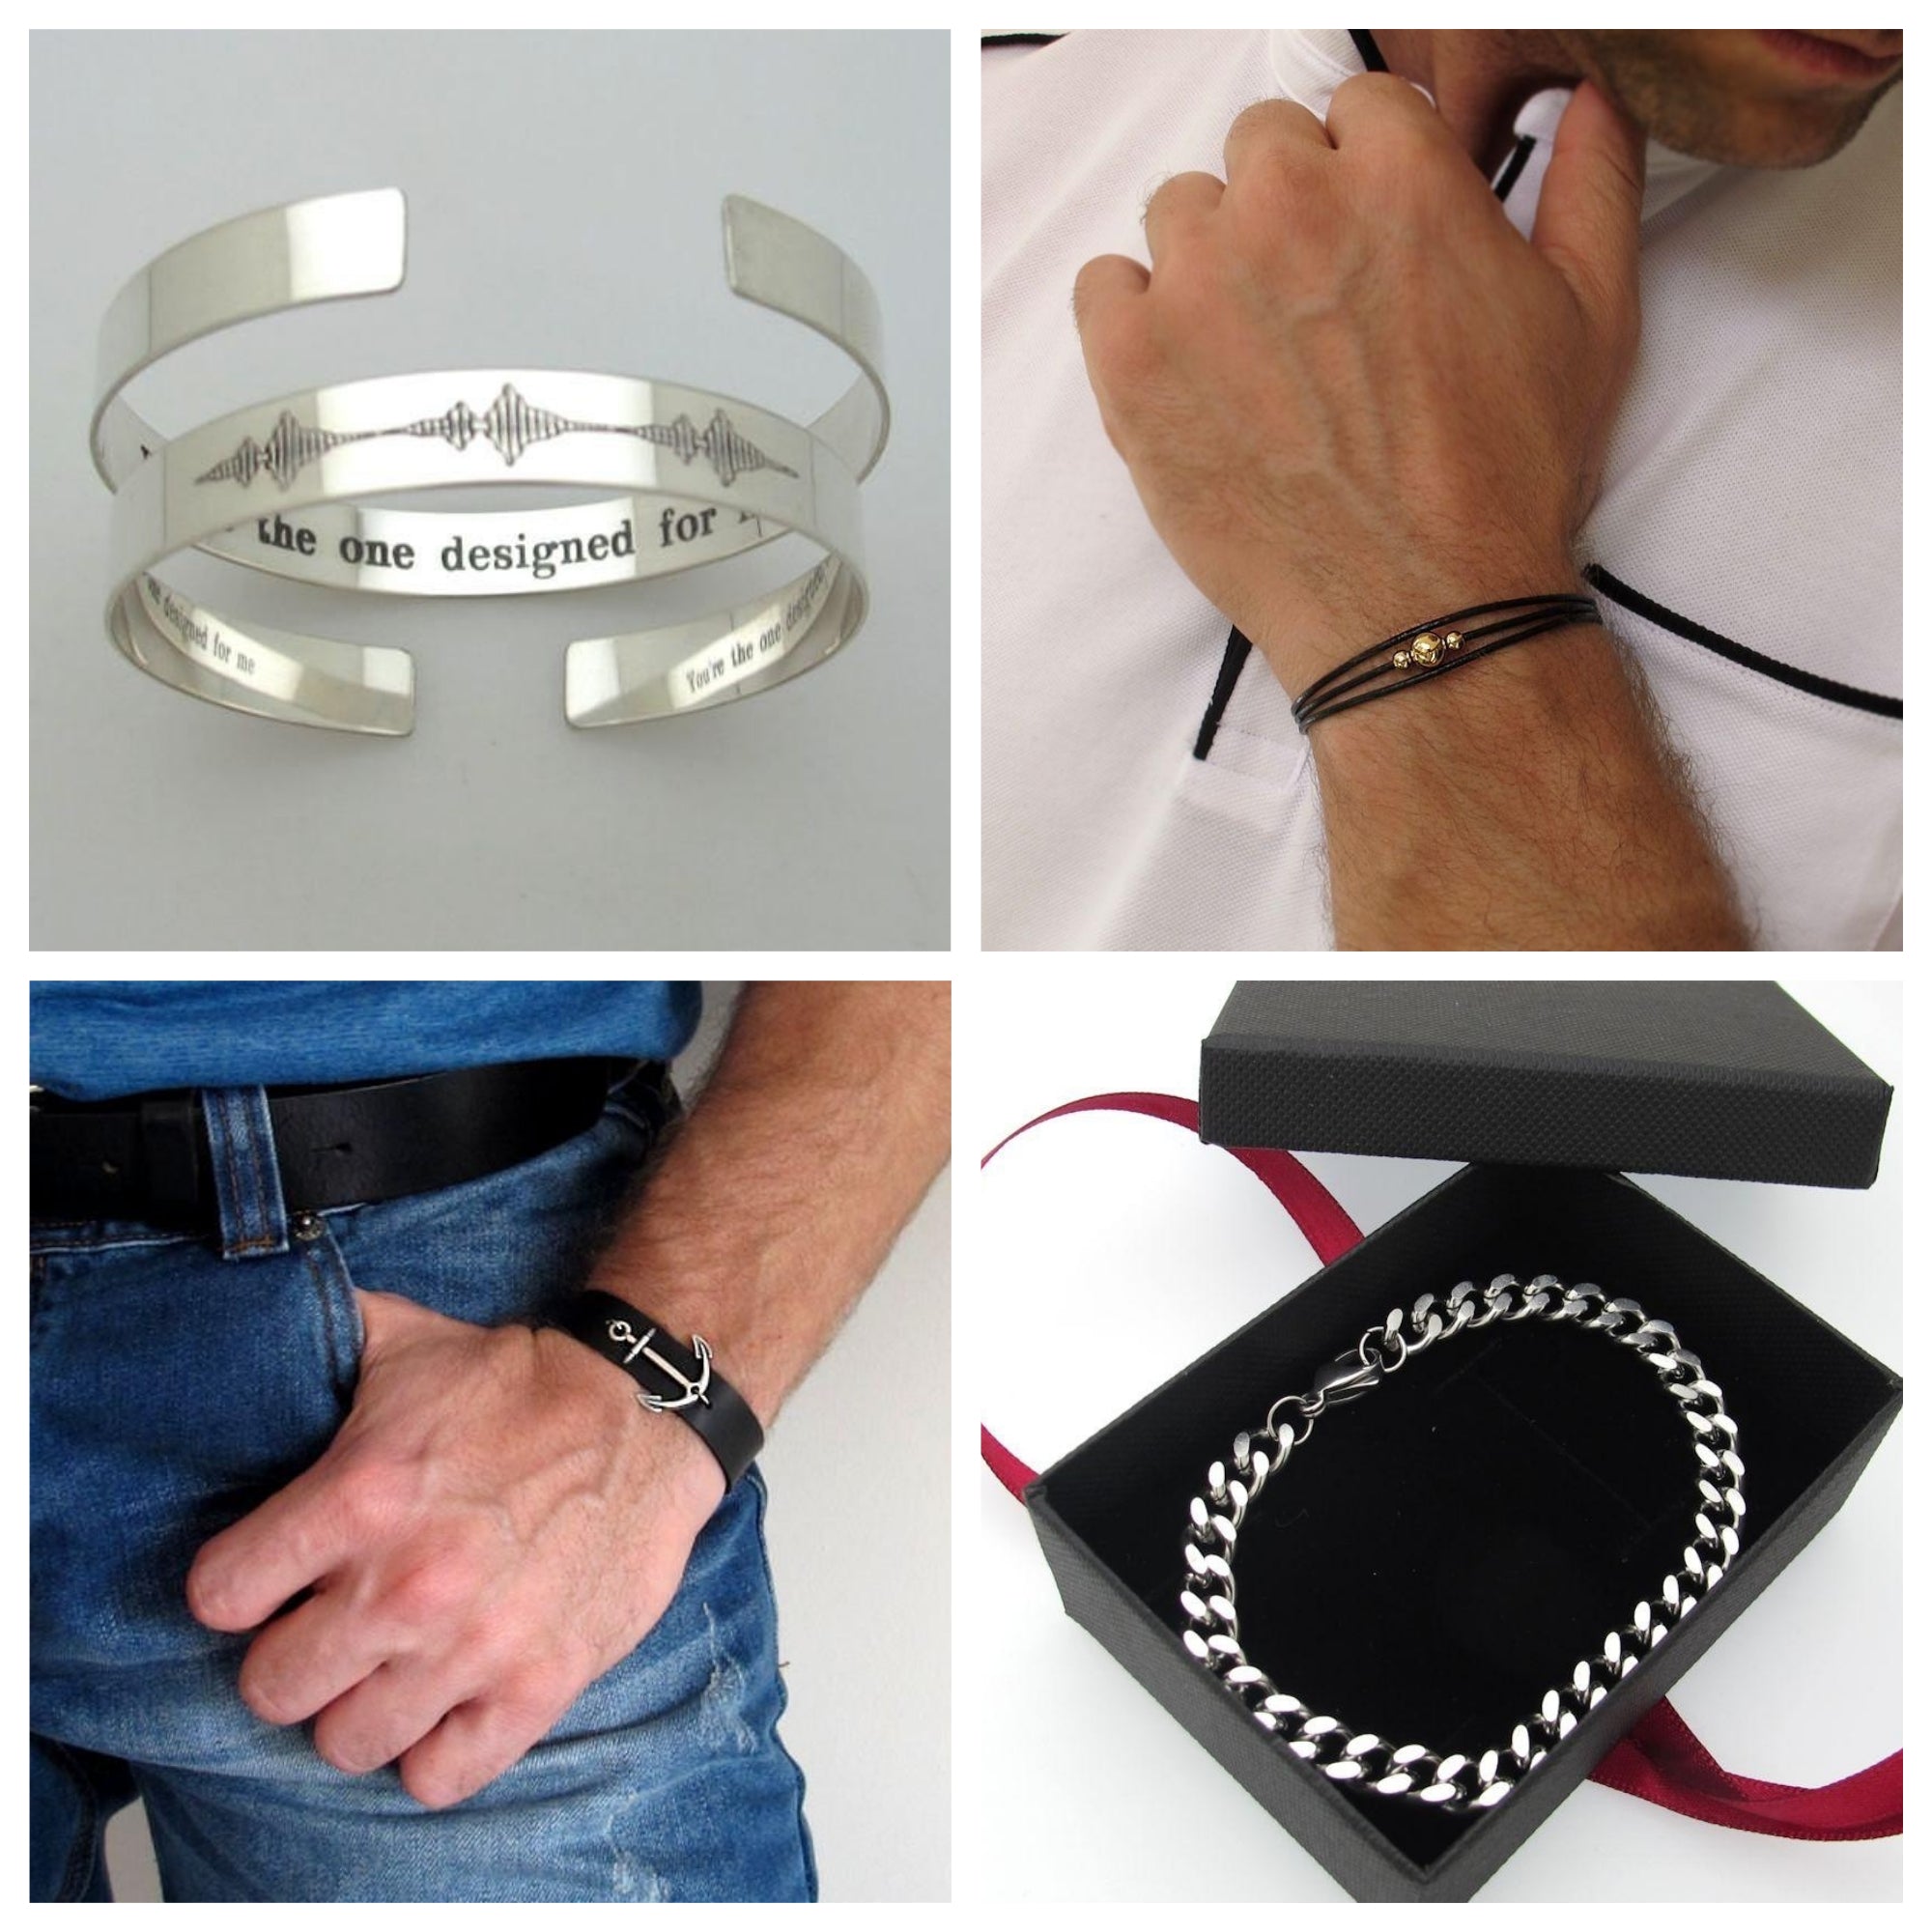 Stable Stainless Steel Medical Alert Bracelets - Choose One Style